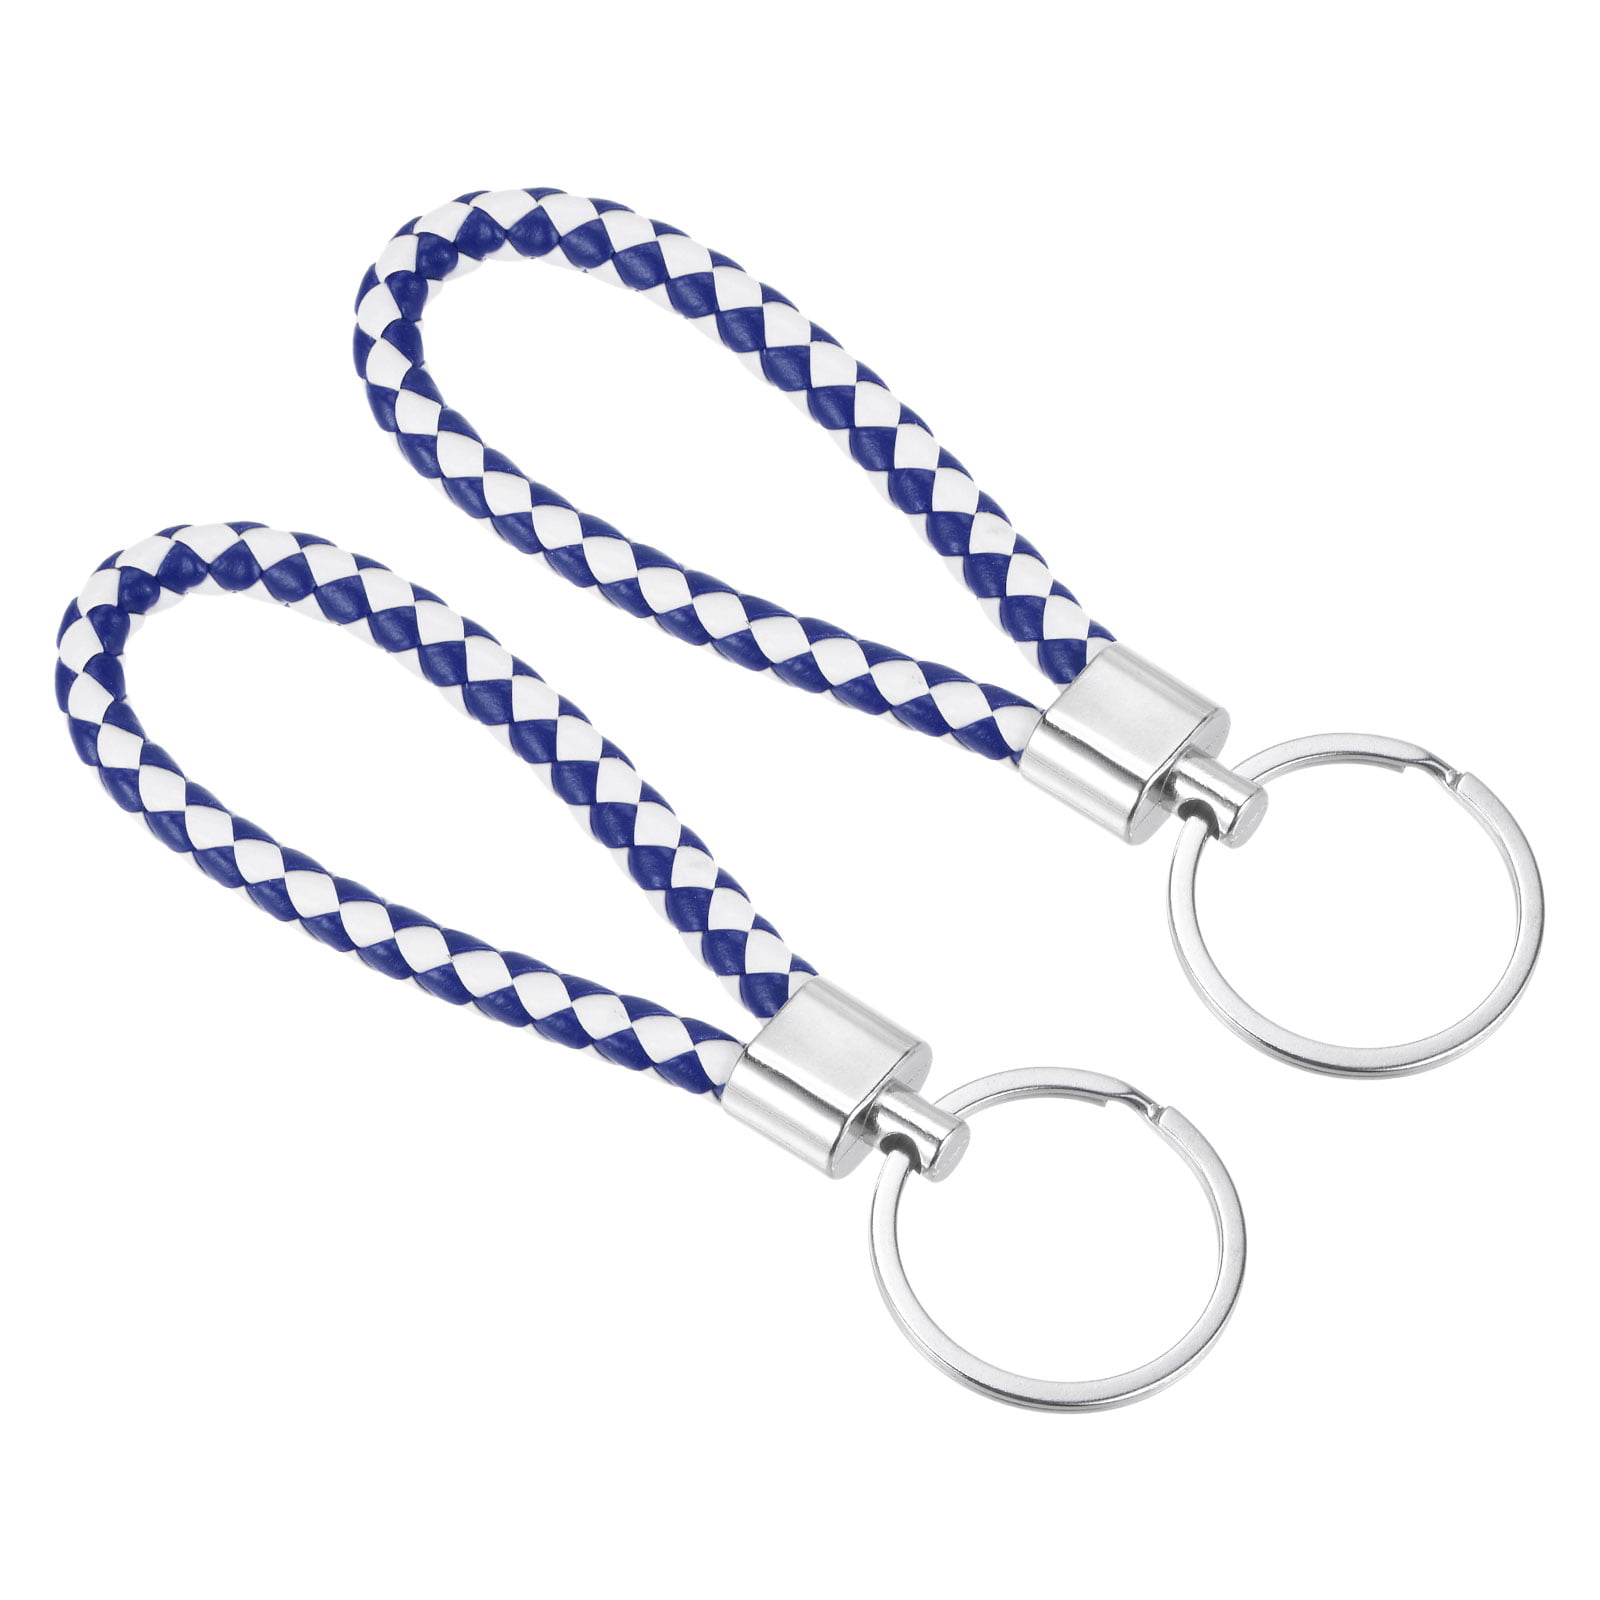 KEYCHAINS AND LANYARDS